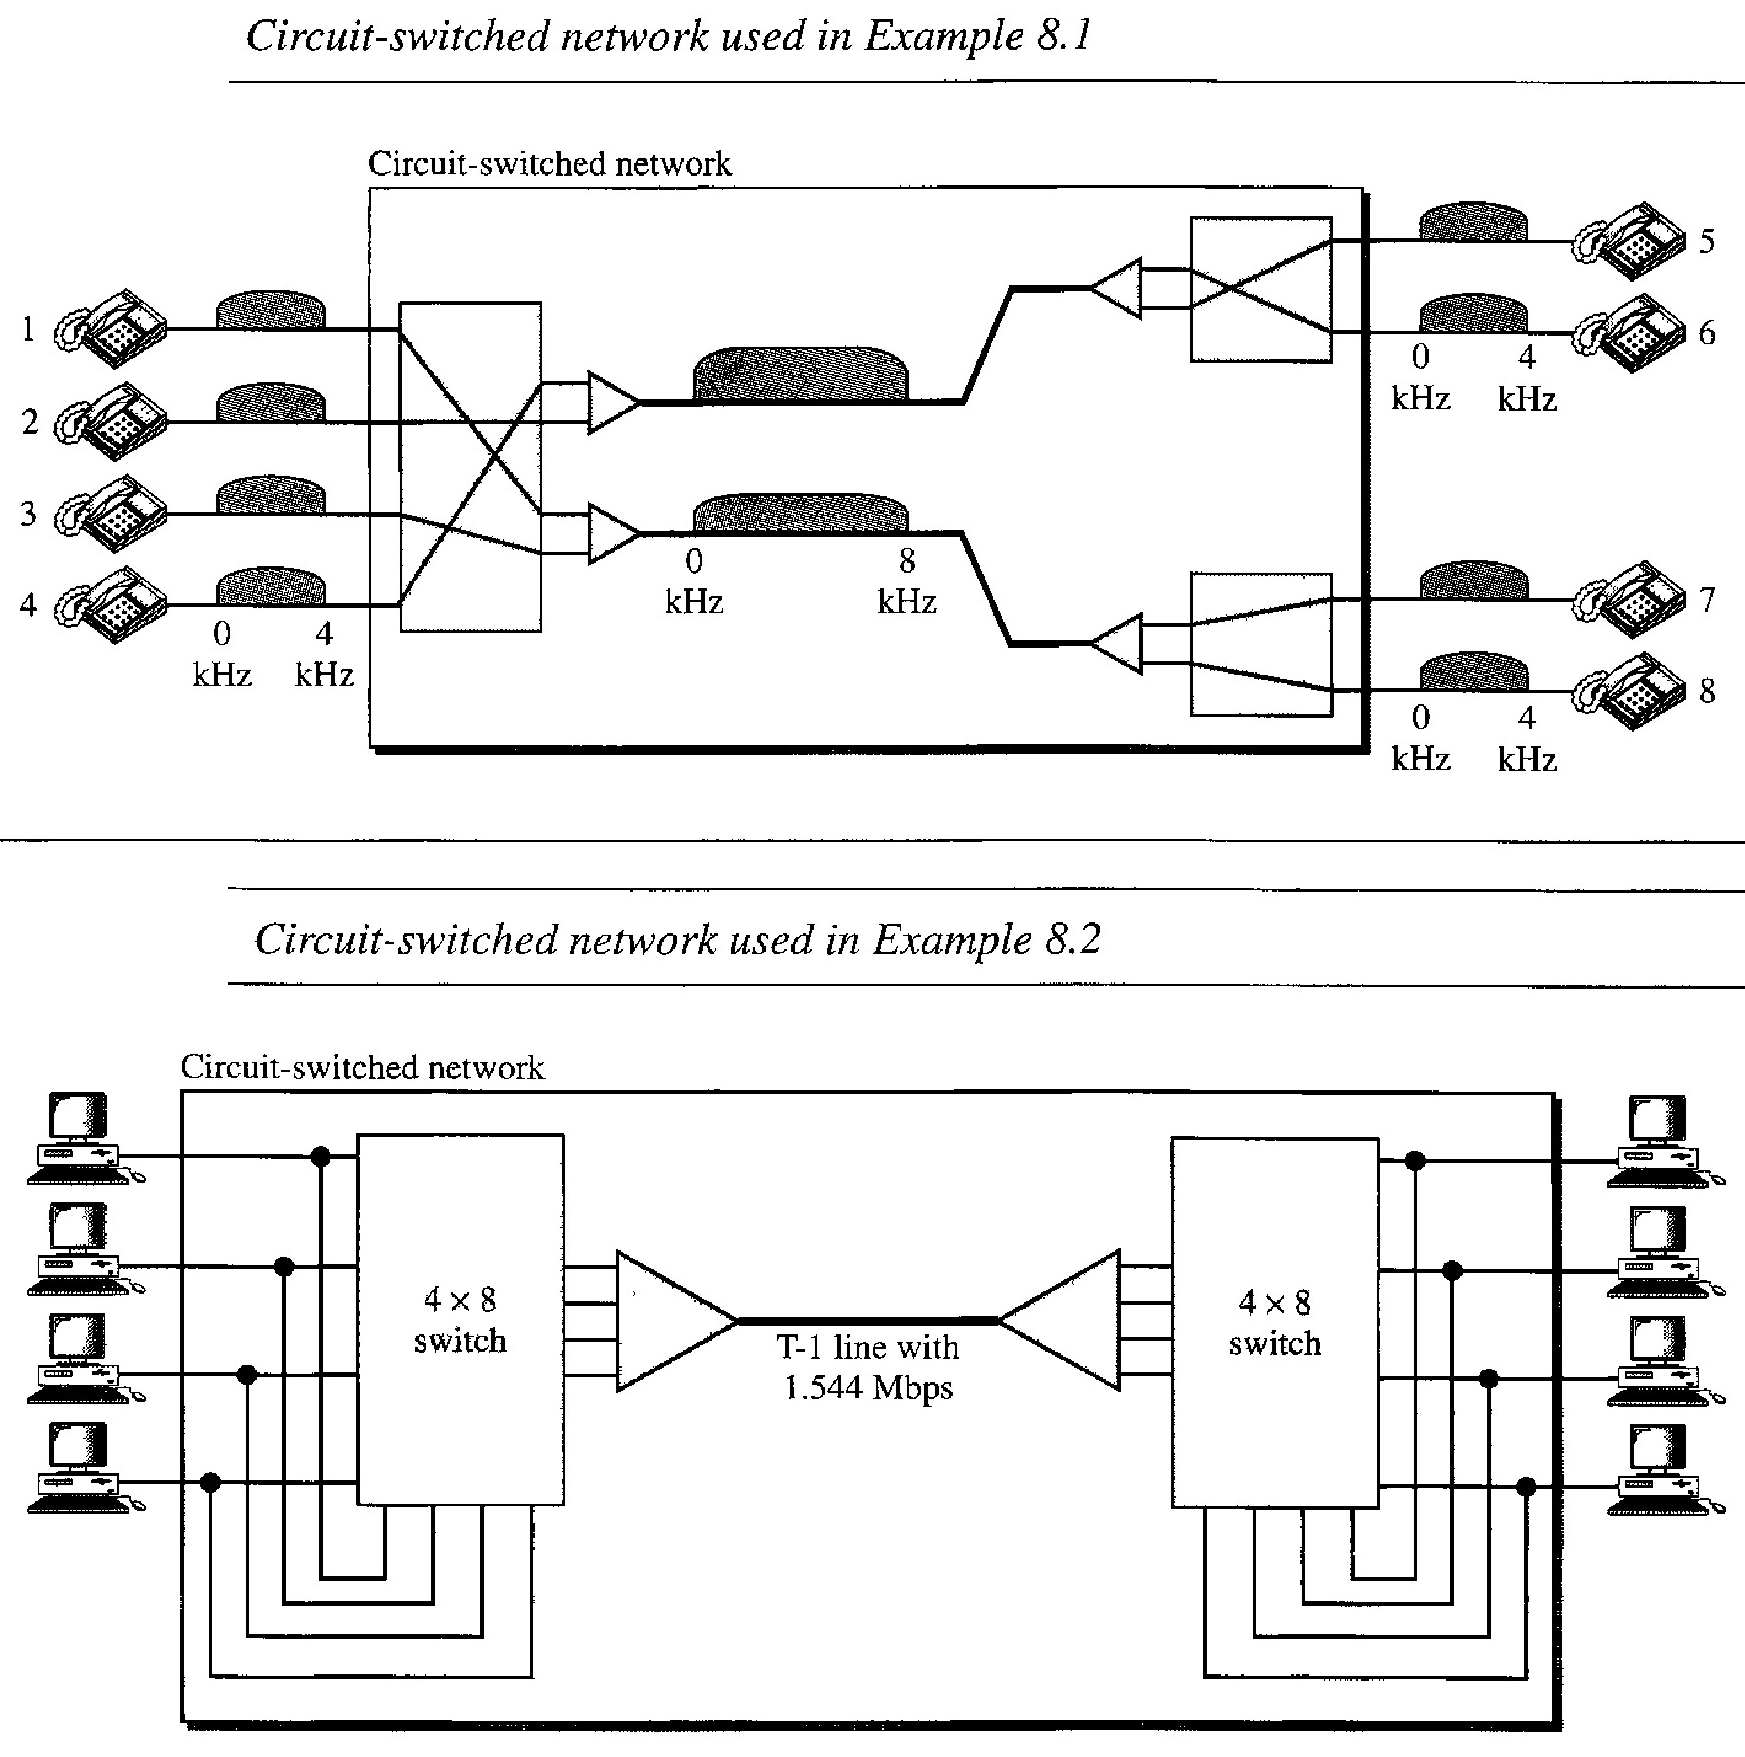 CIRCUIT-SWITCHED NETWORKS